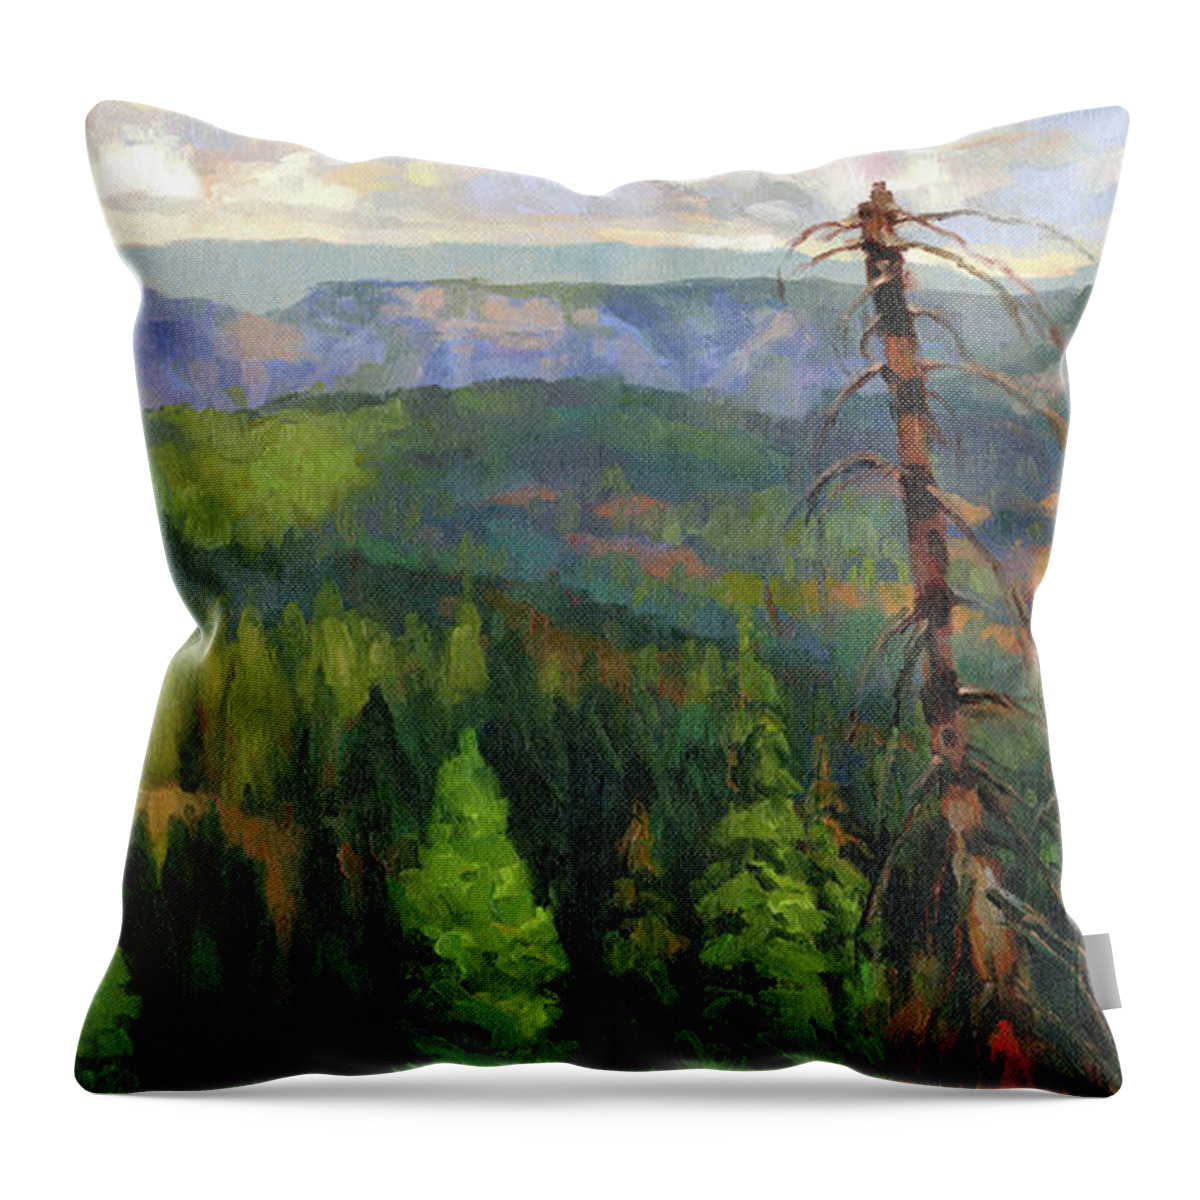 Wilderness Throw Pillow featuring the painting Ladycamp by Steve Henderson